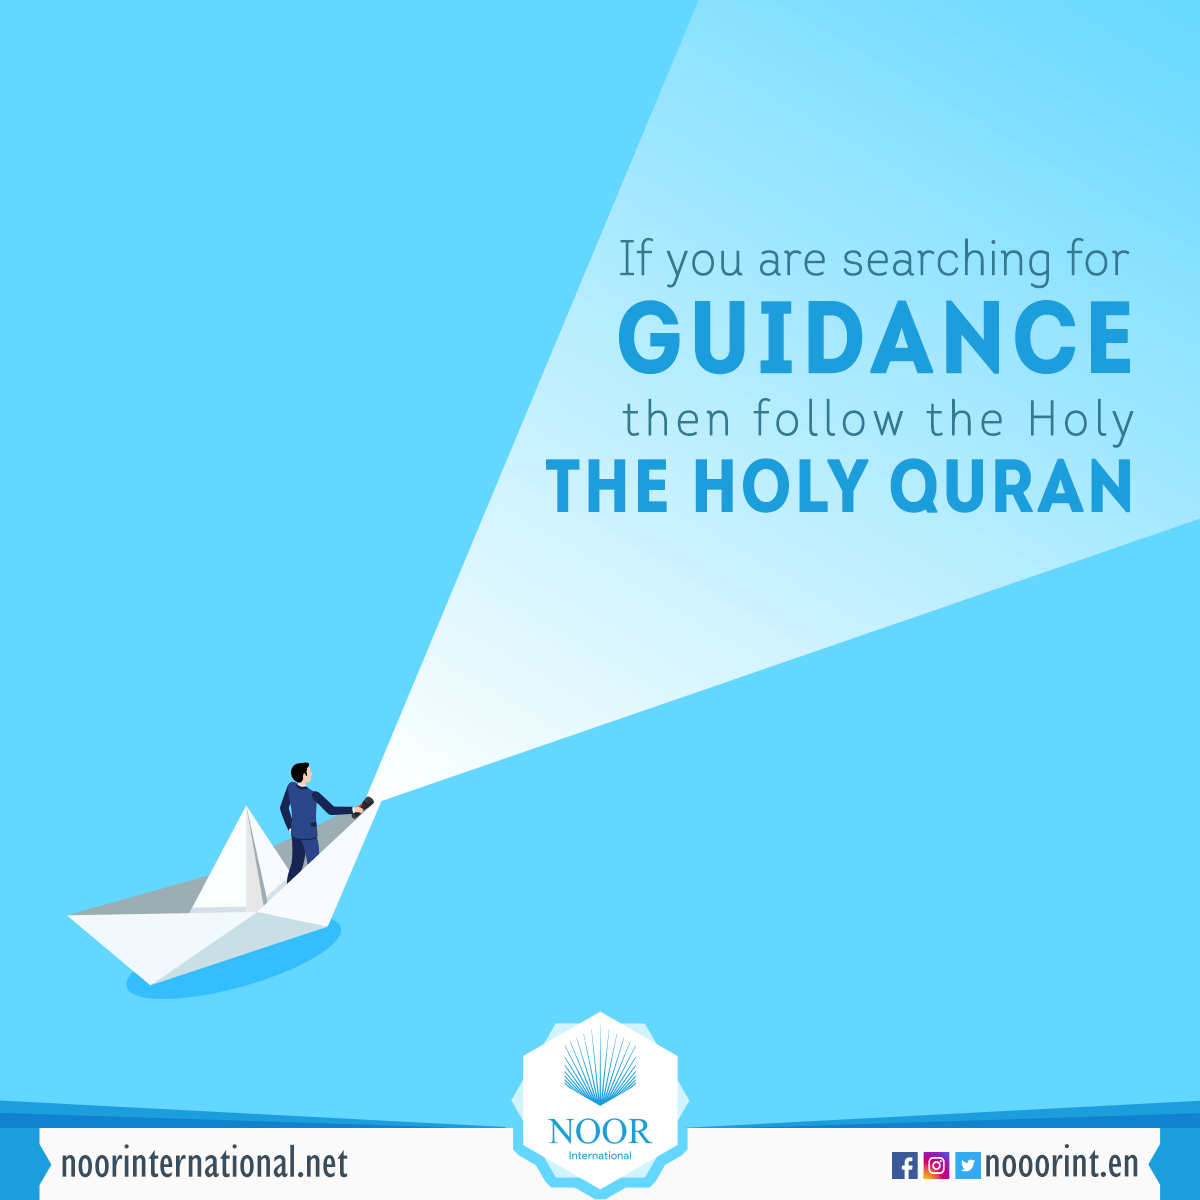 If you are searching for guidance, then follow the Holy Quran